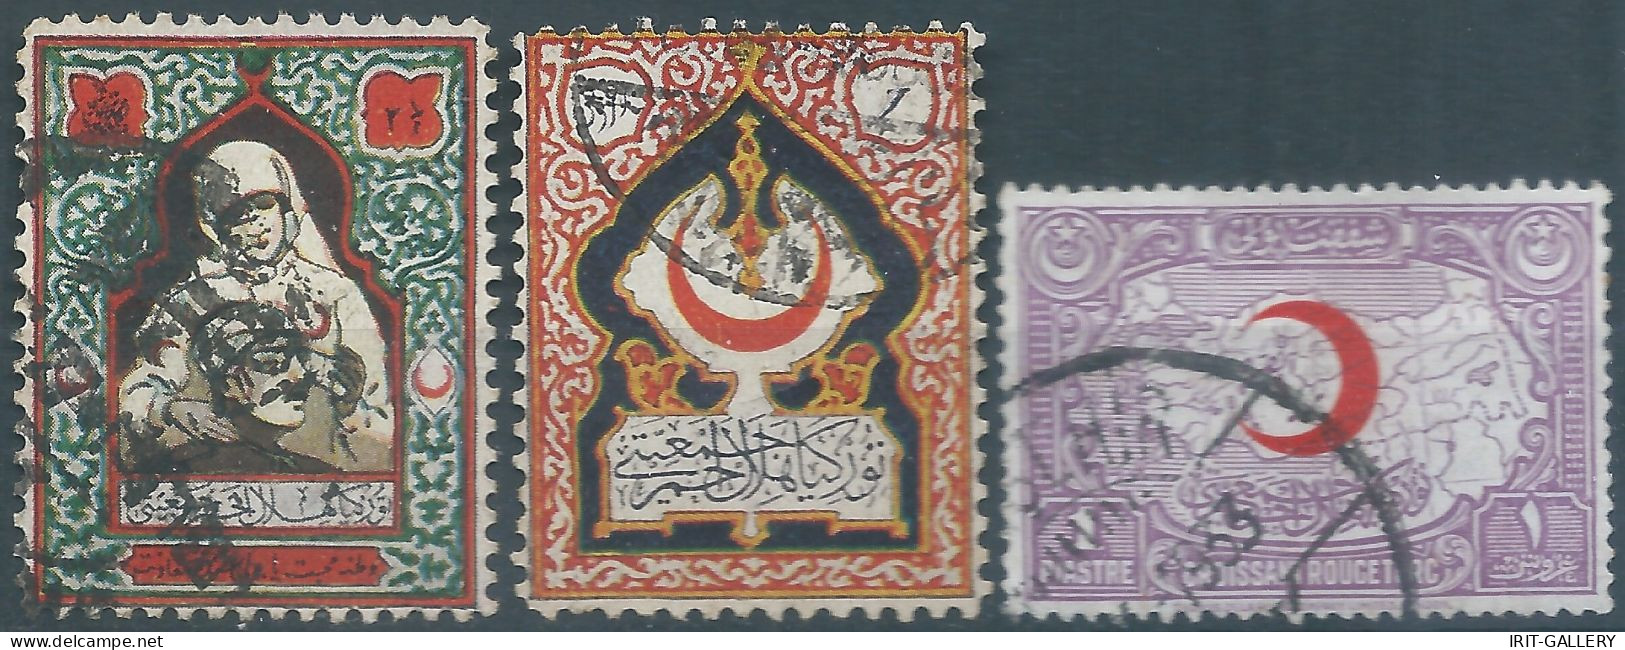 TURKEY-TÜRKEI-TURQUIE,Red Crescent For Help And Charity,Used - Used Stamps